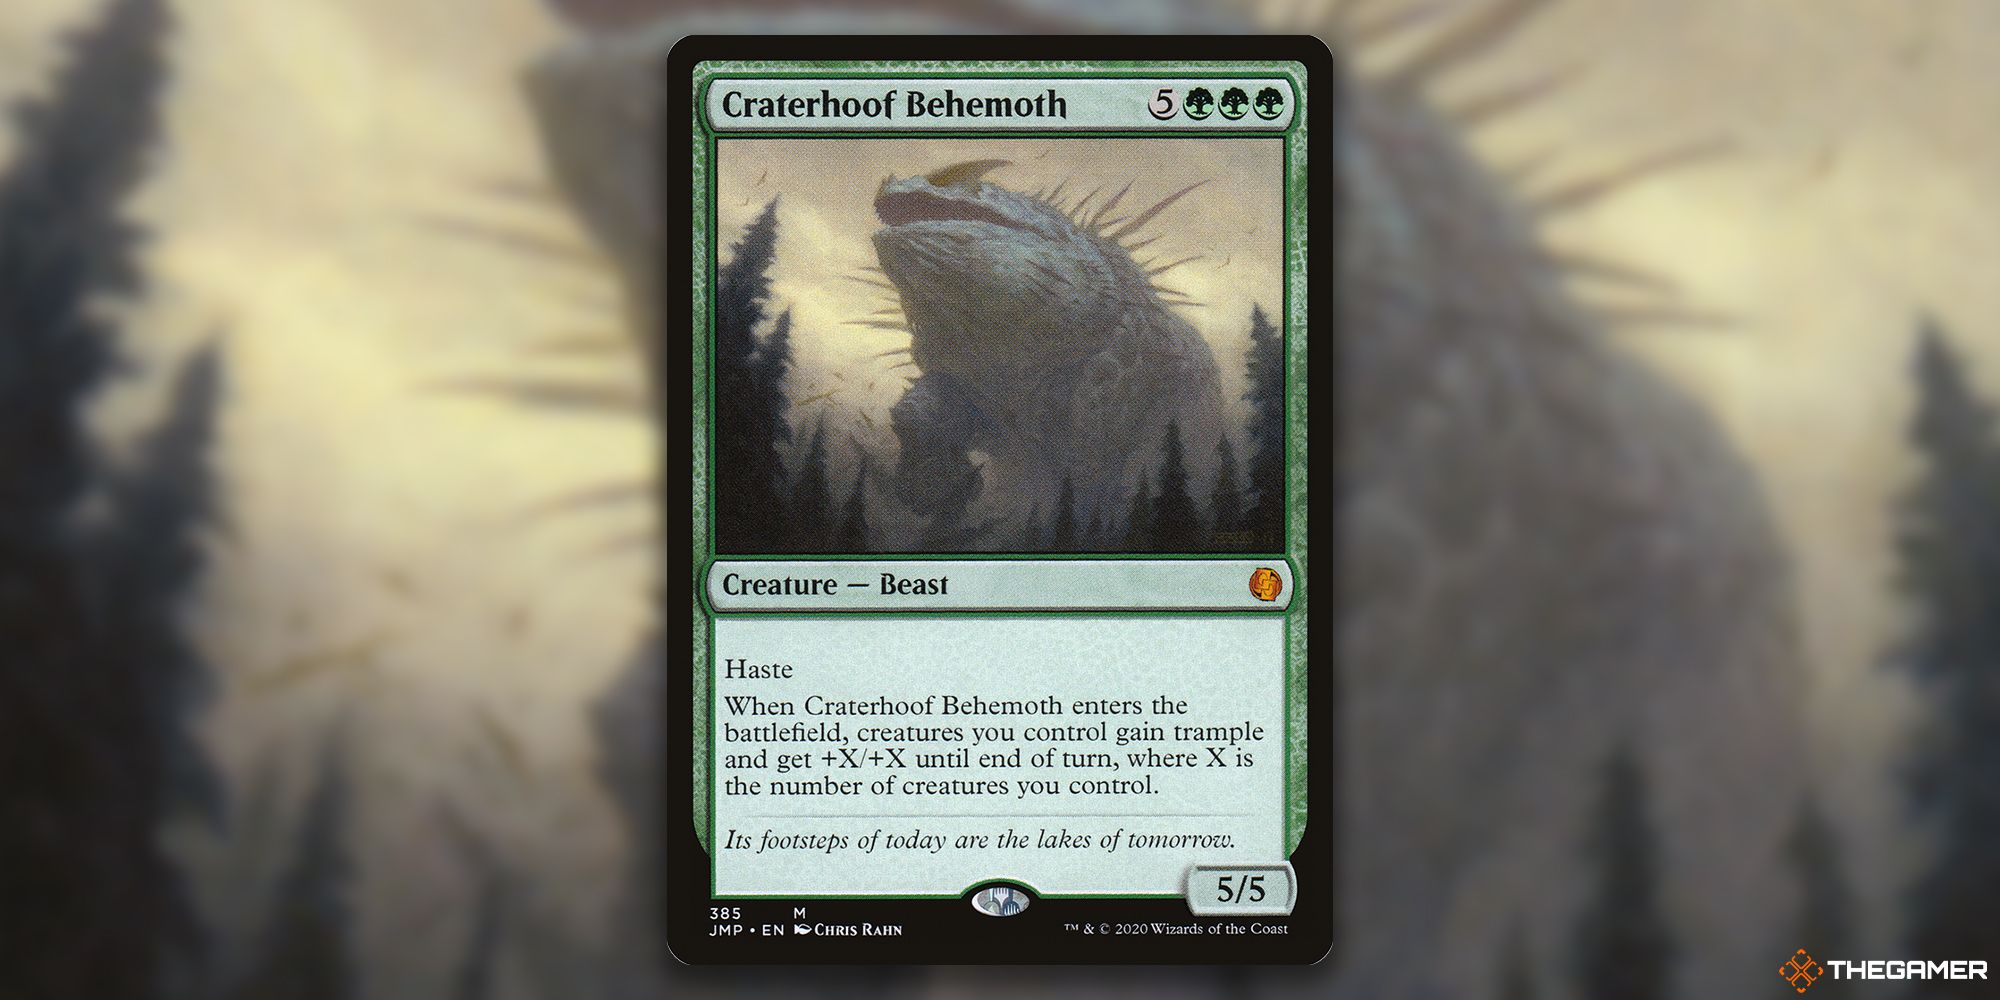 Image of the Craterhoof Behemoth card in Magic: The Gathering, with art by Chris Rahn